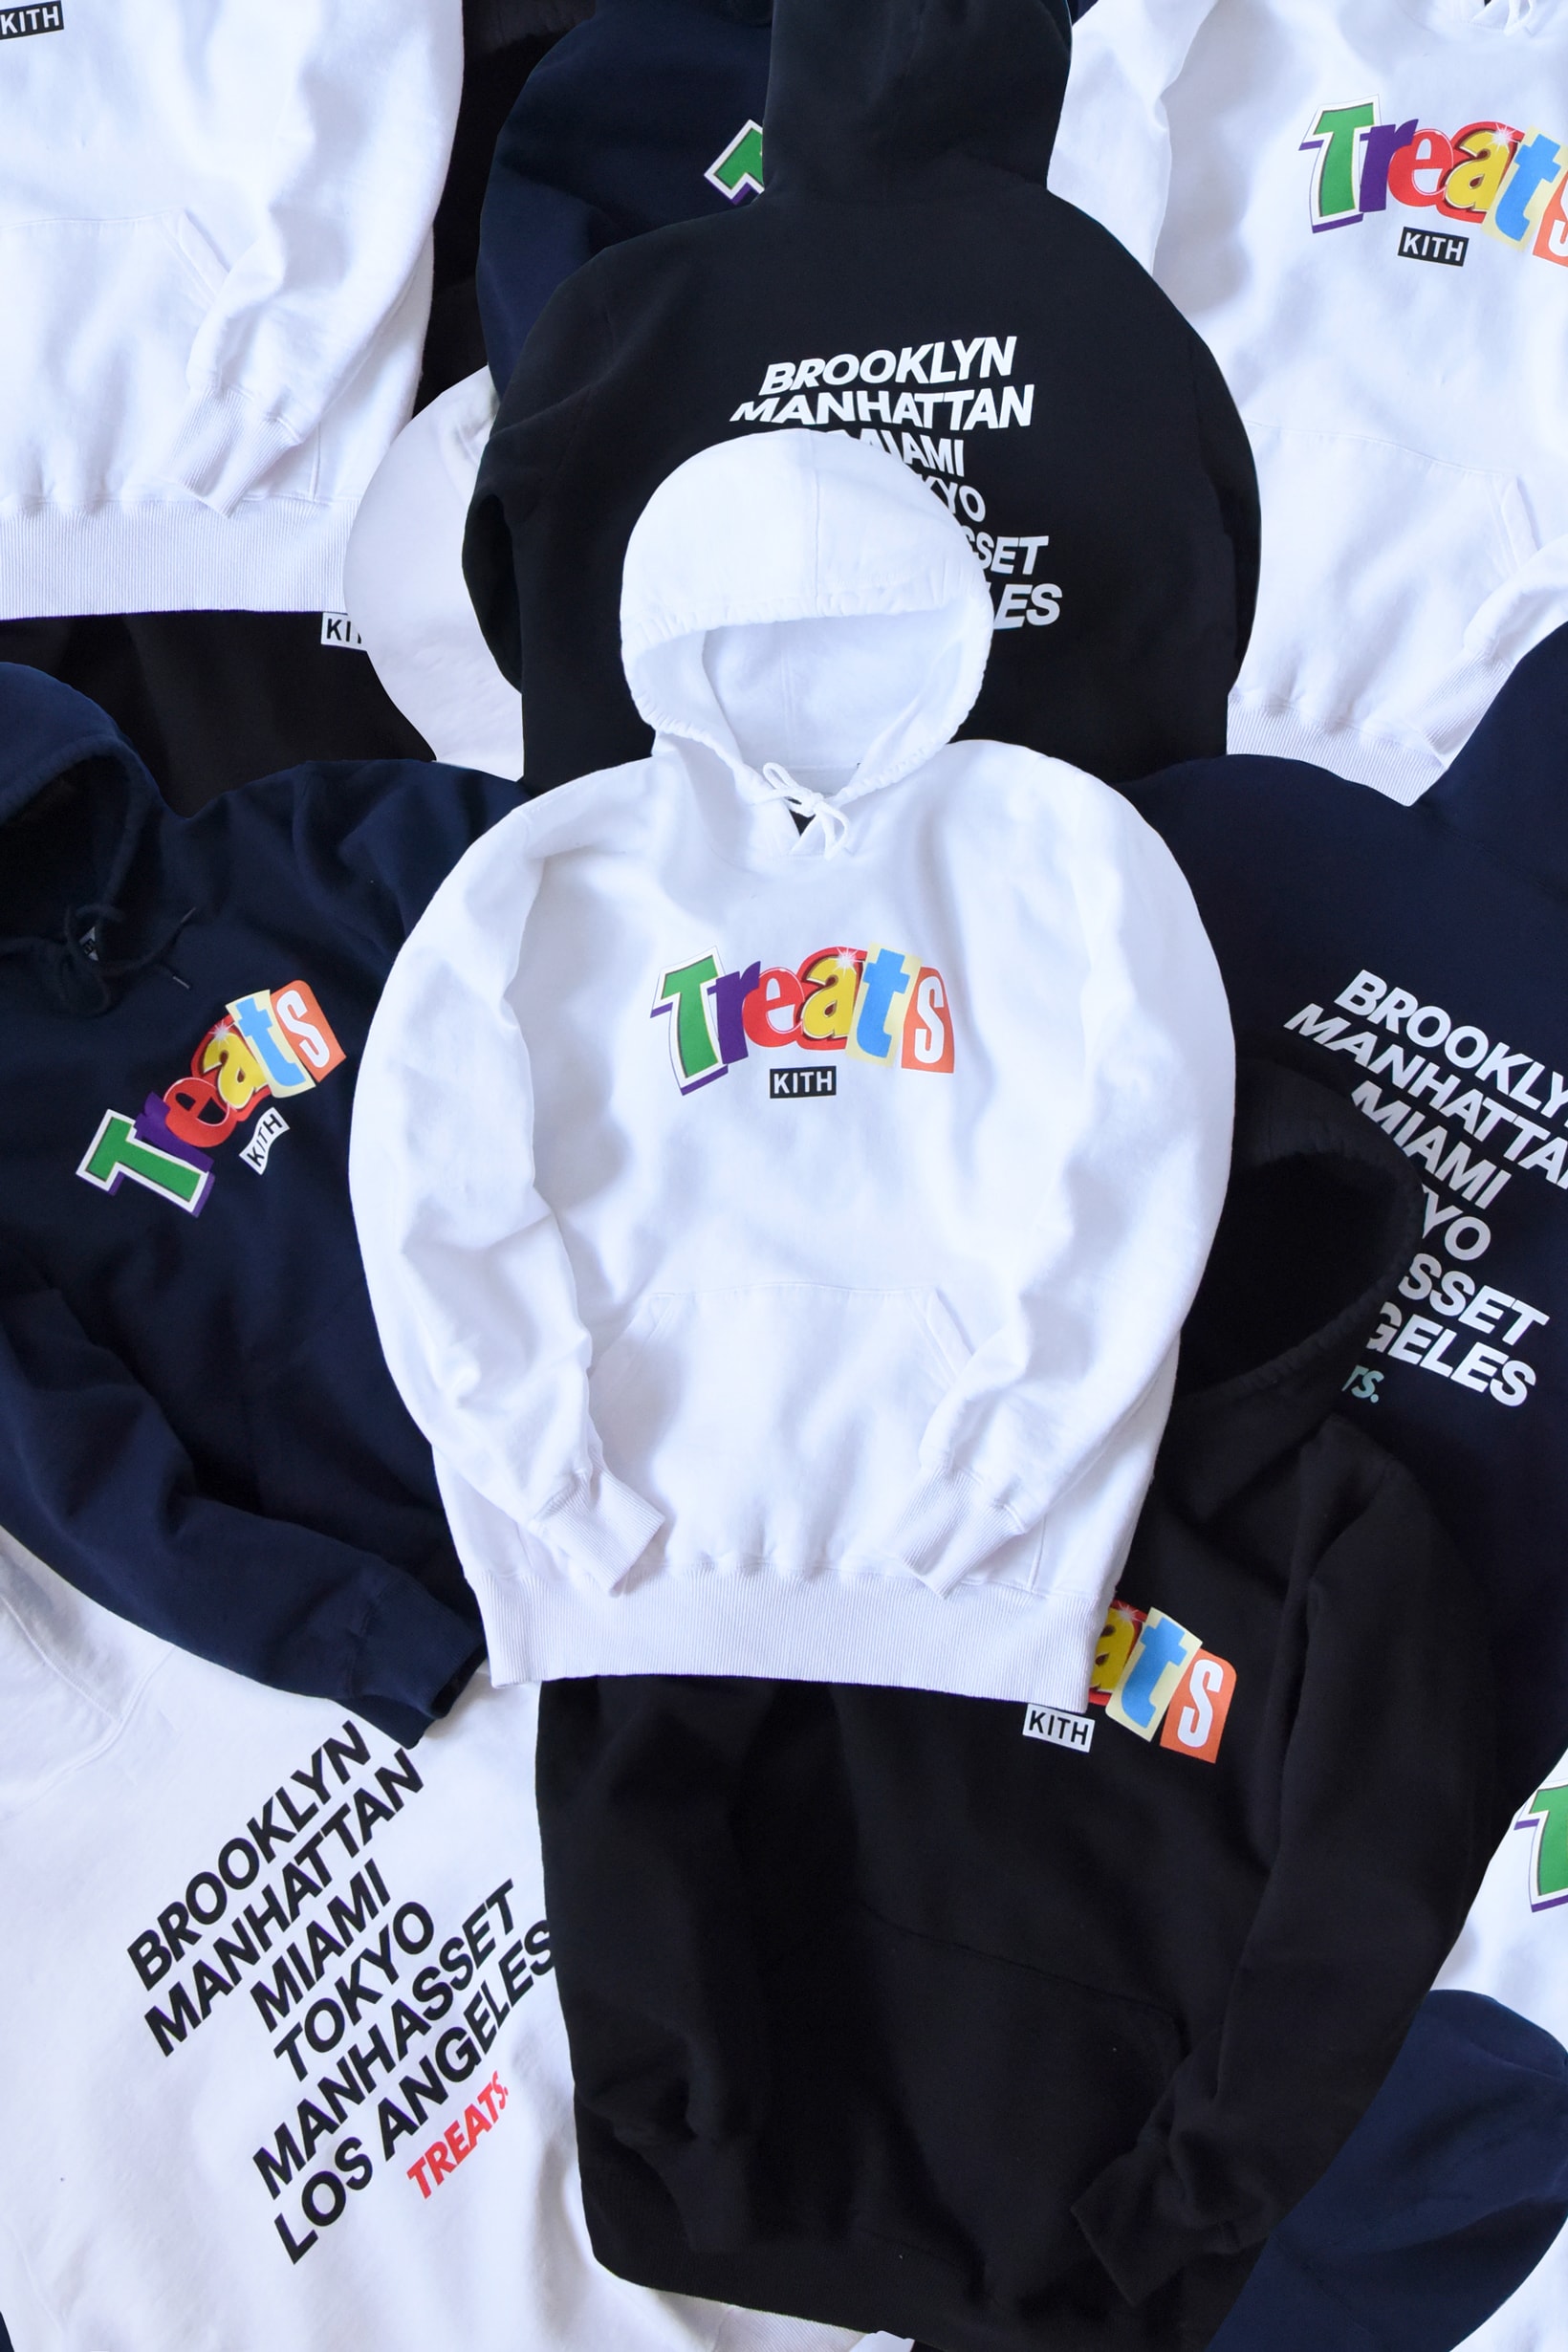 KITH Treats National Cereal Day 2019 Ransom Collection Hoodies Navy White Black